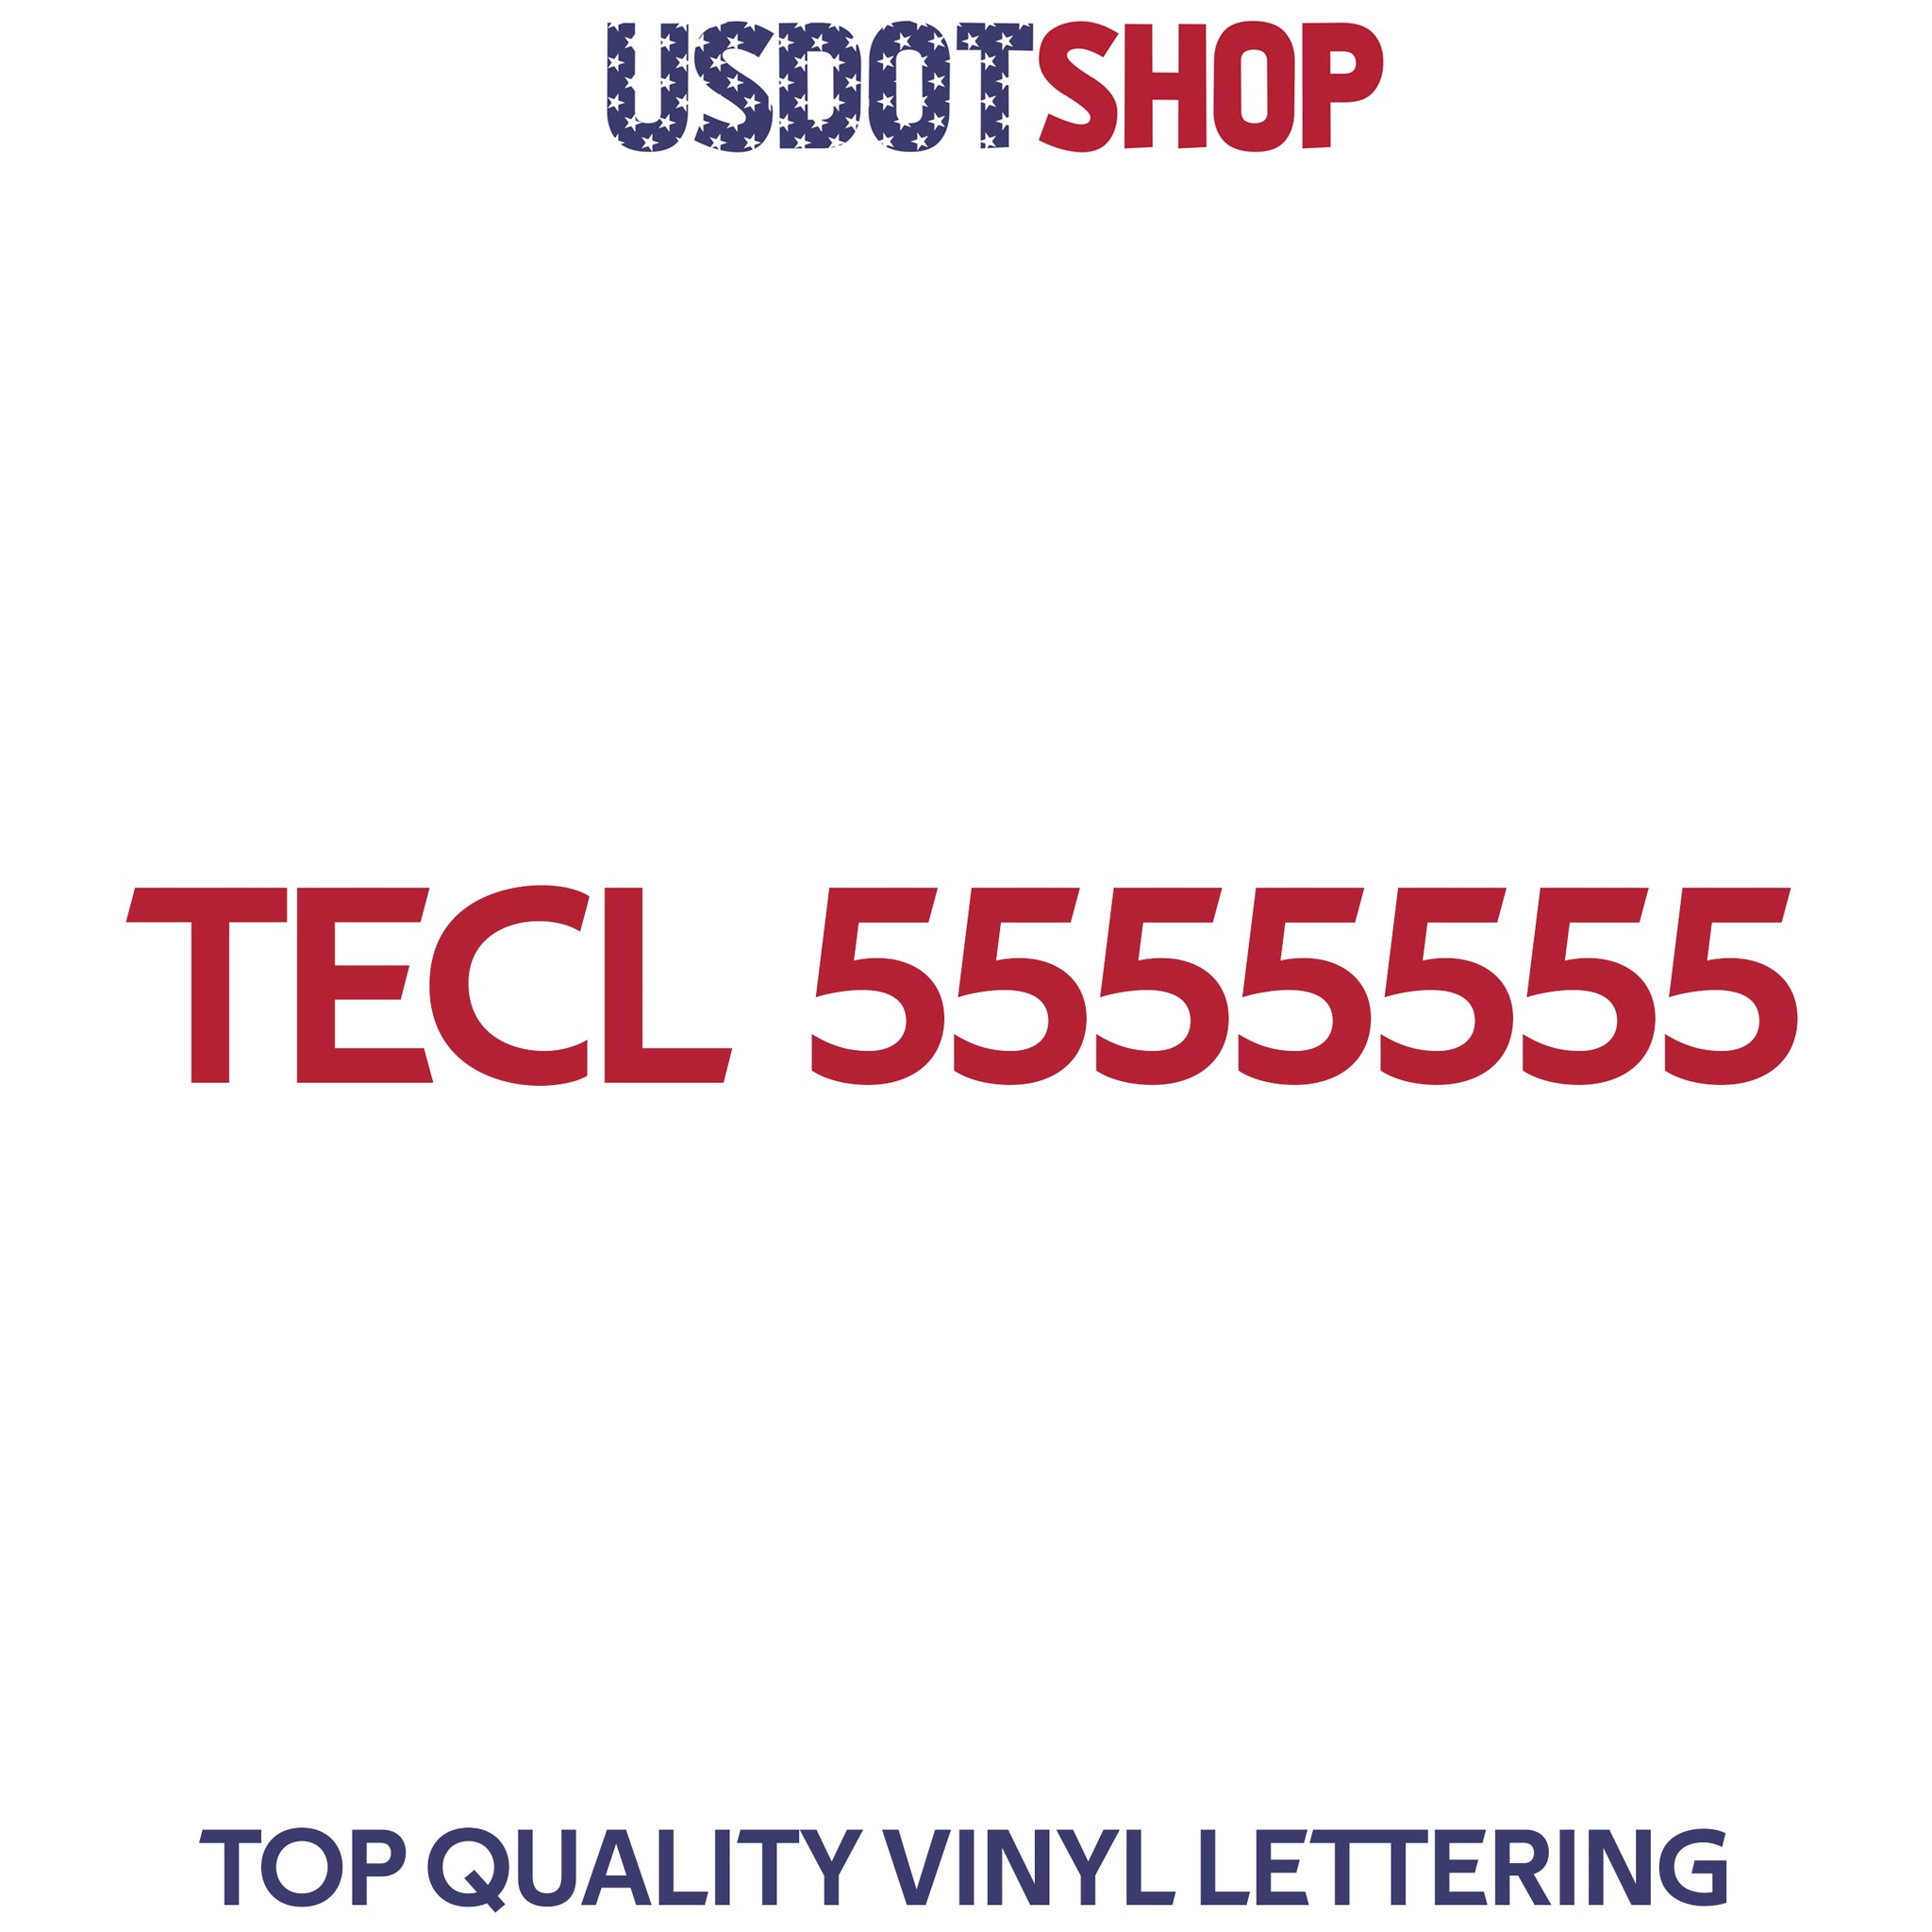 TECL number decal